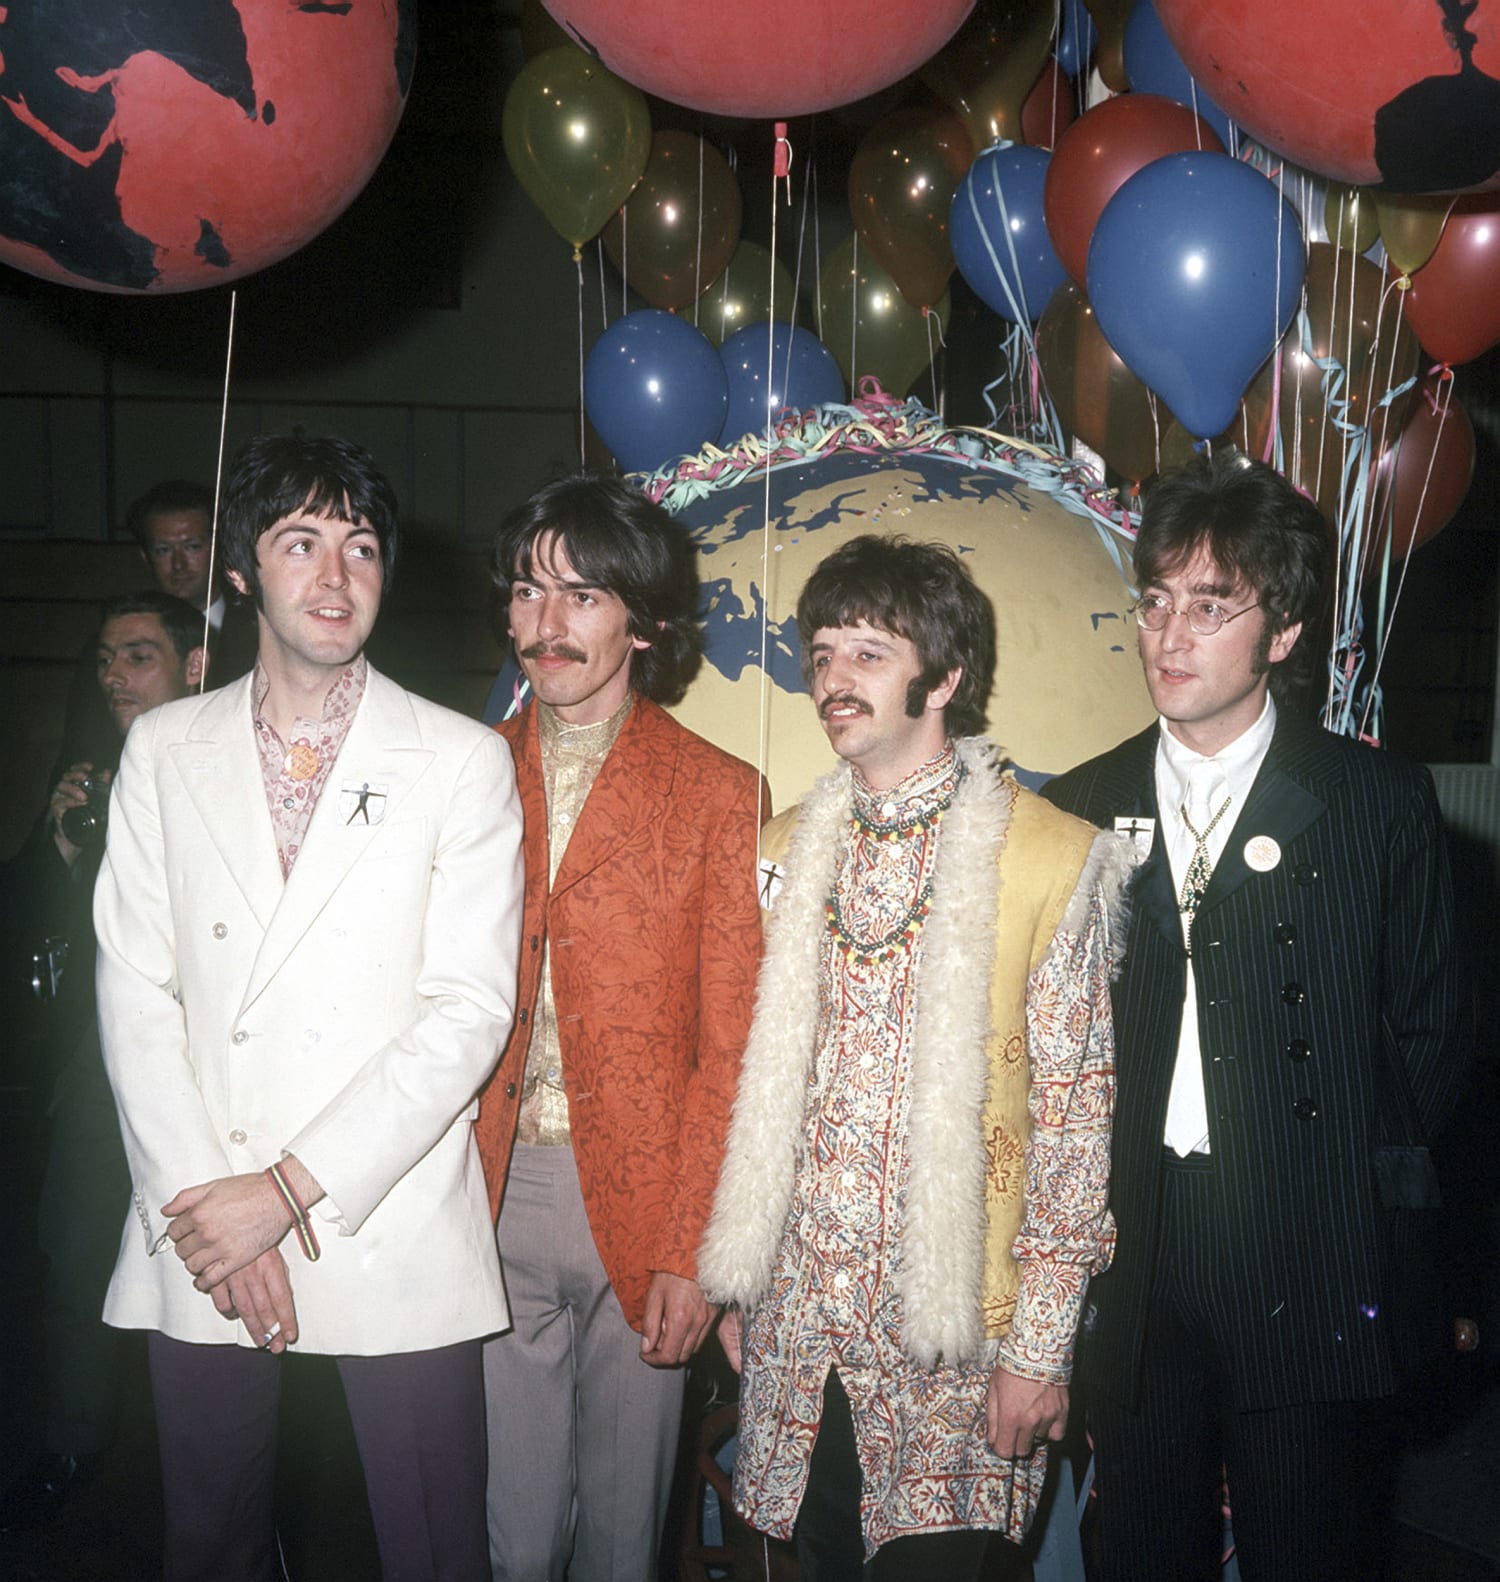 The final Beatles song, 'Now and Then,' featuring all four members